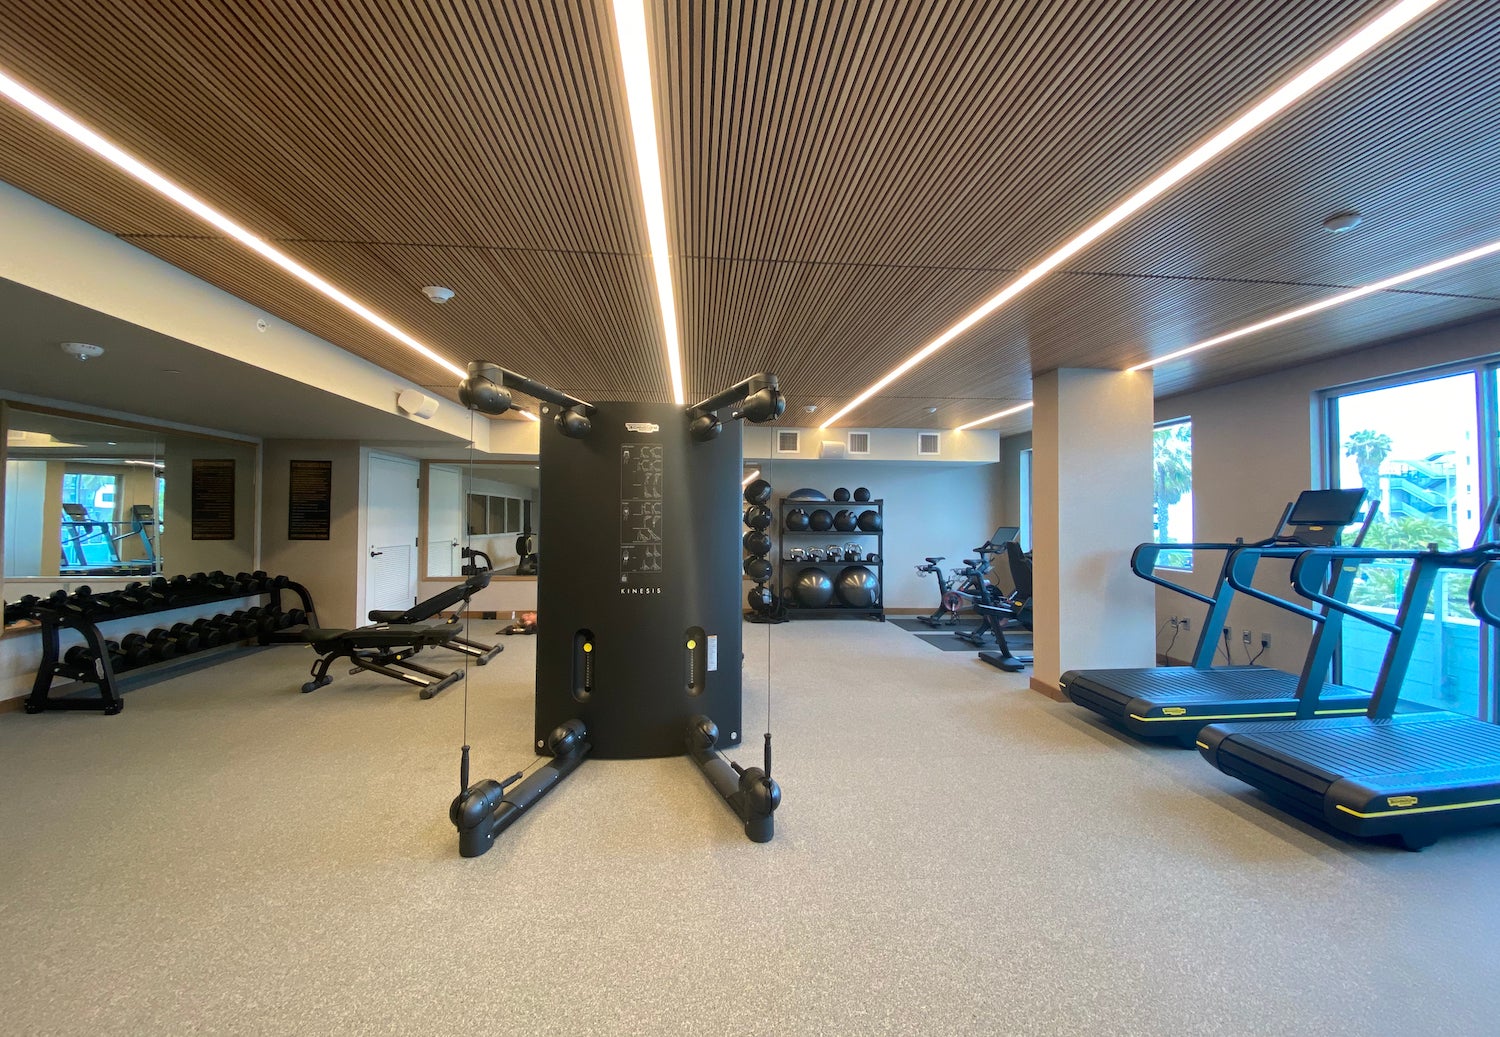 Mission Pacific Hotel gym equippent